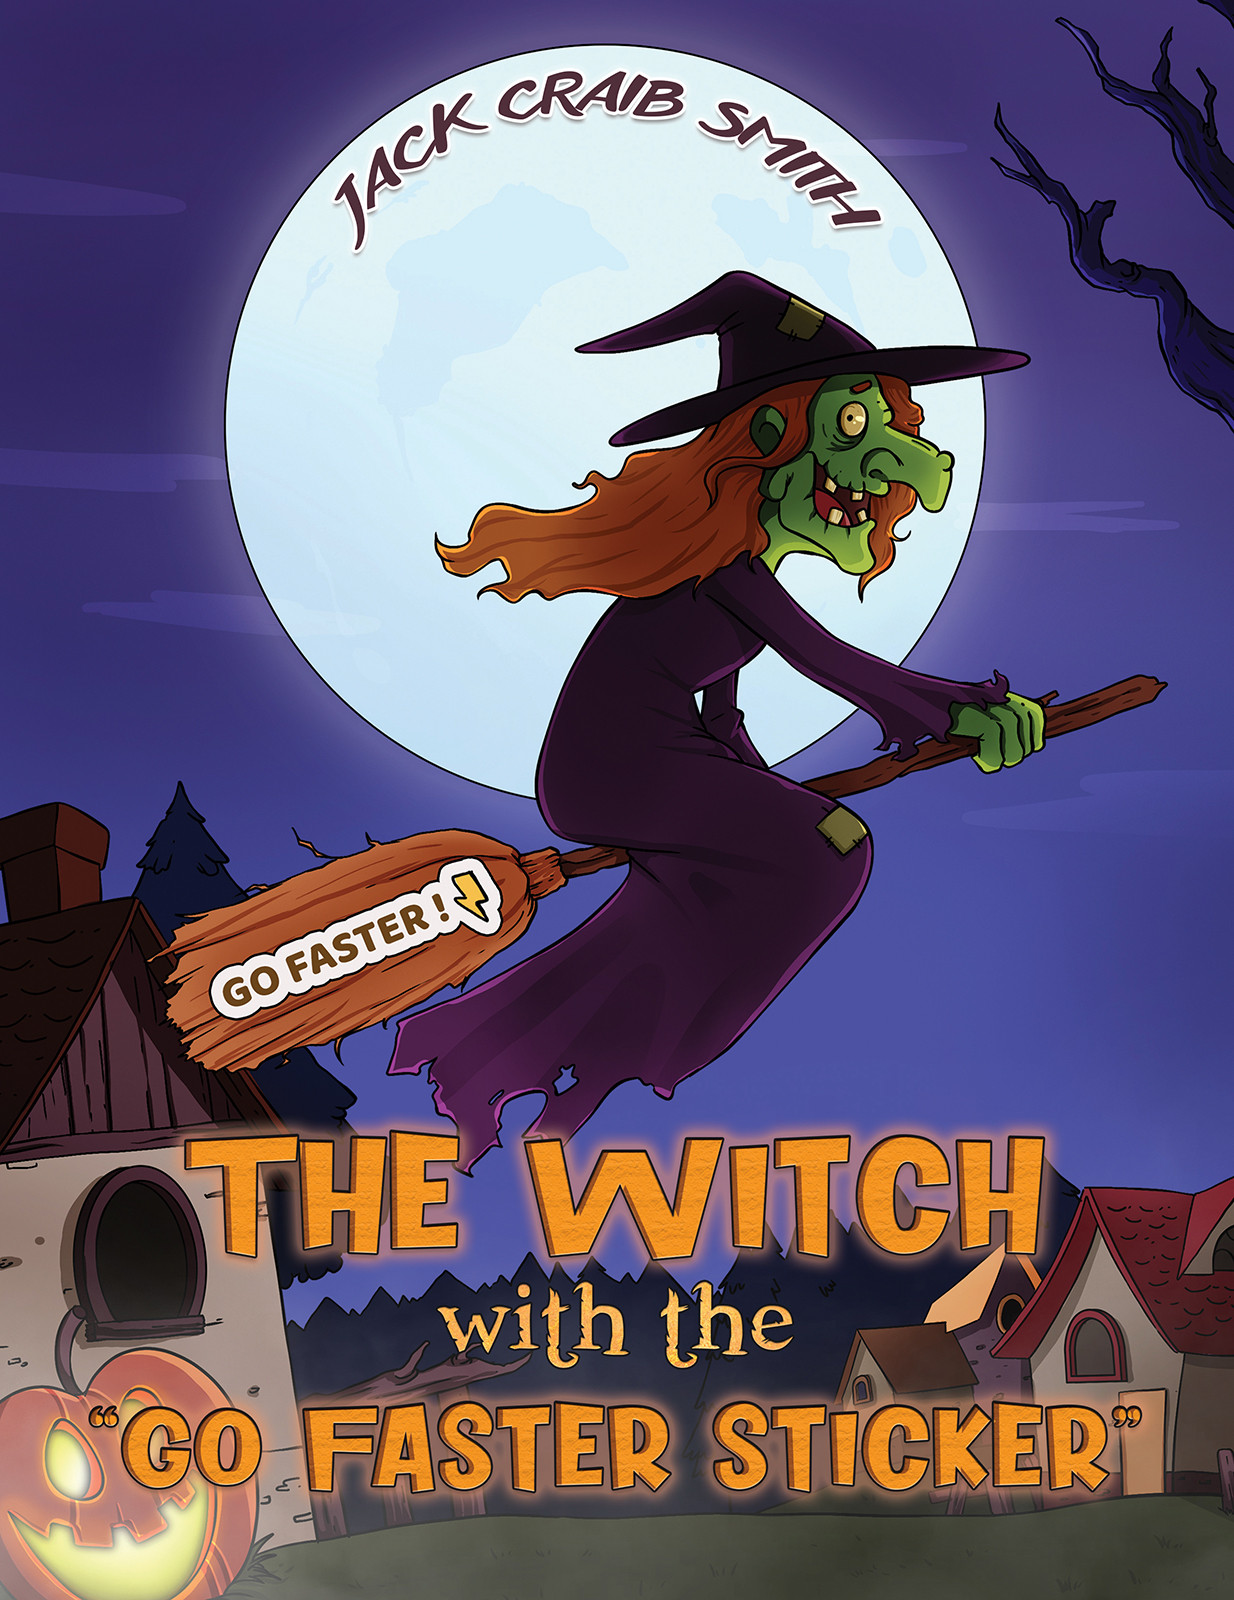 The Witch with the "Go Faster Sticker"